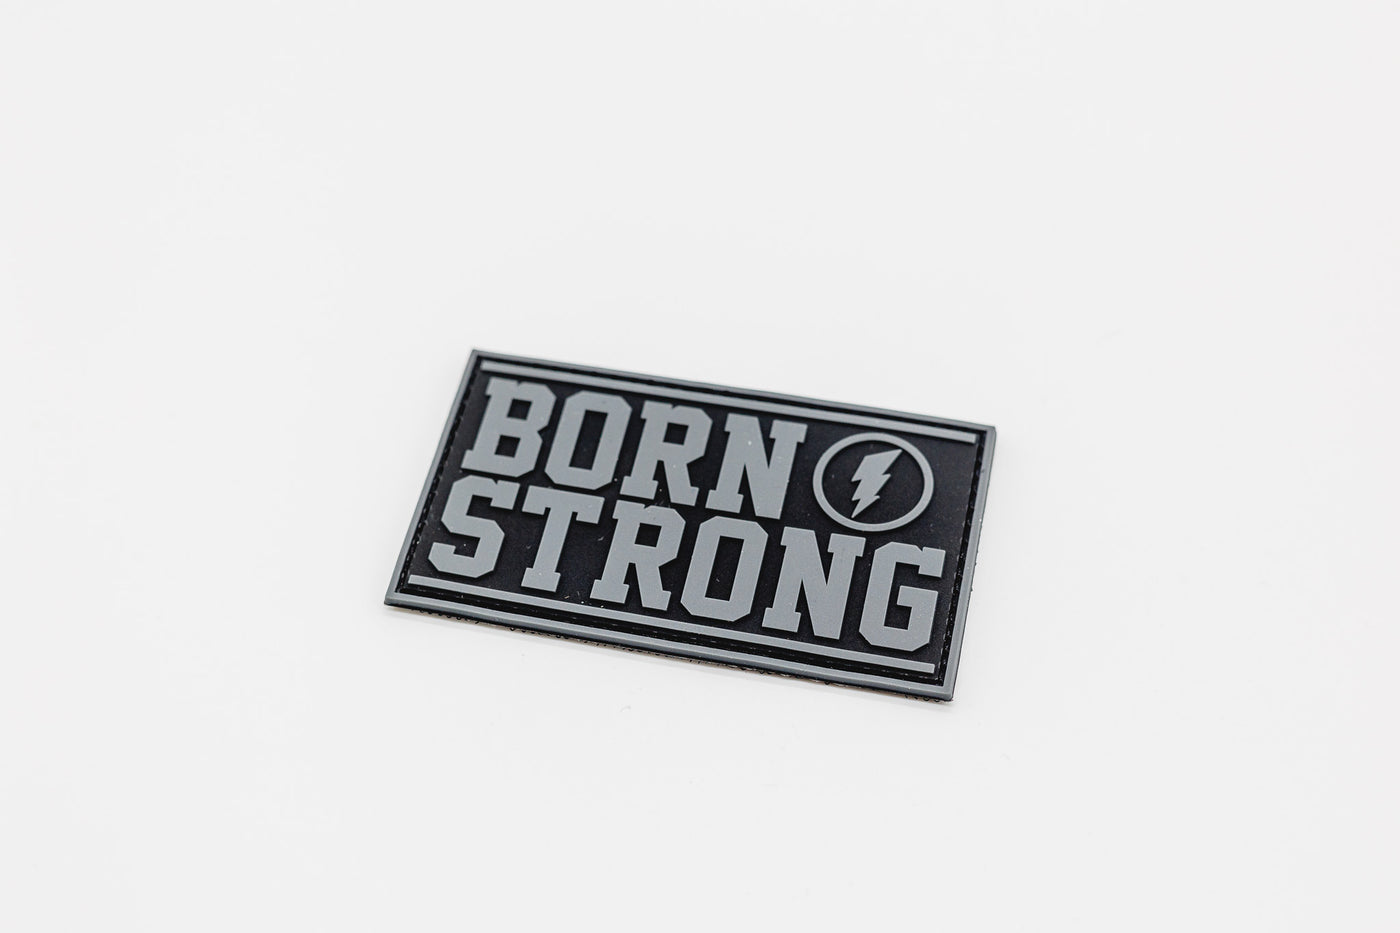 BORN STRONG-logopatch